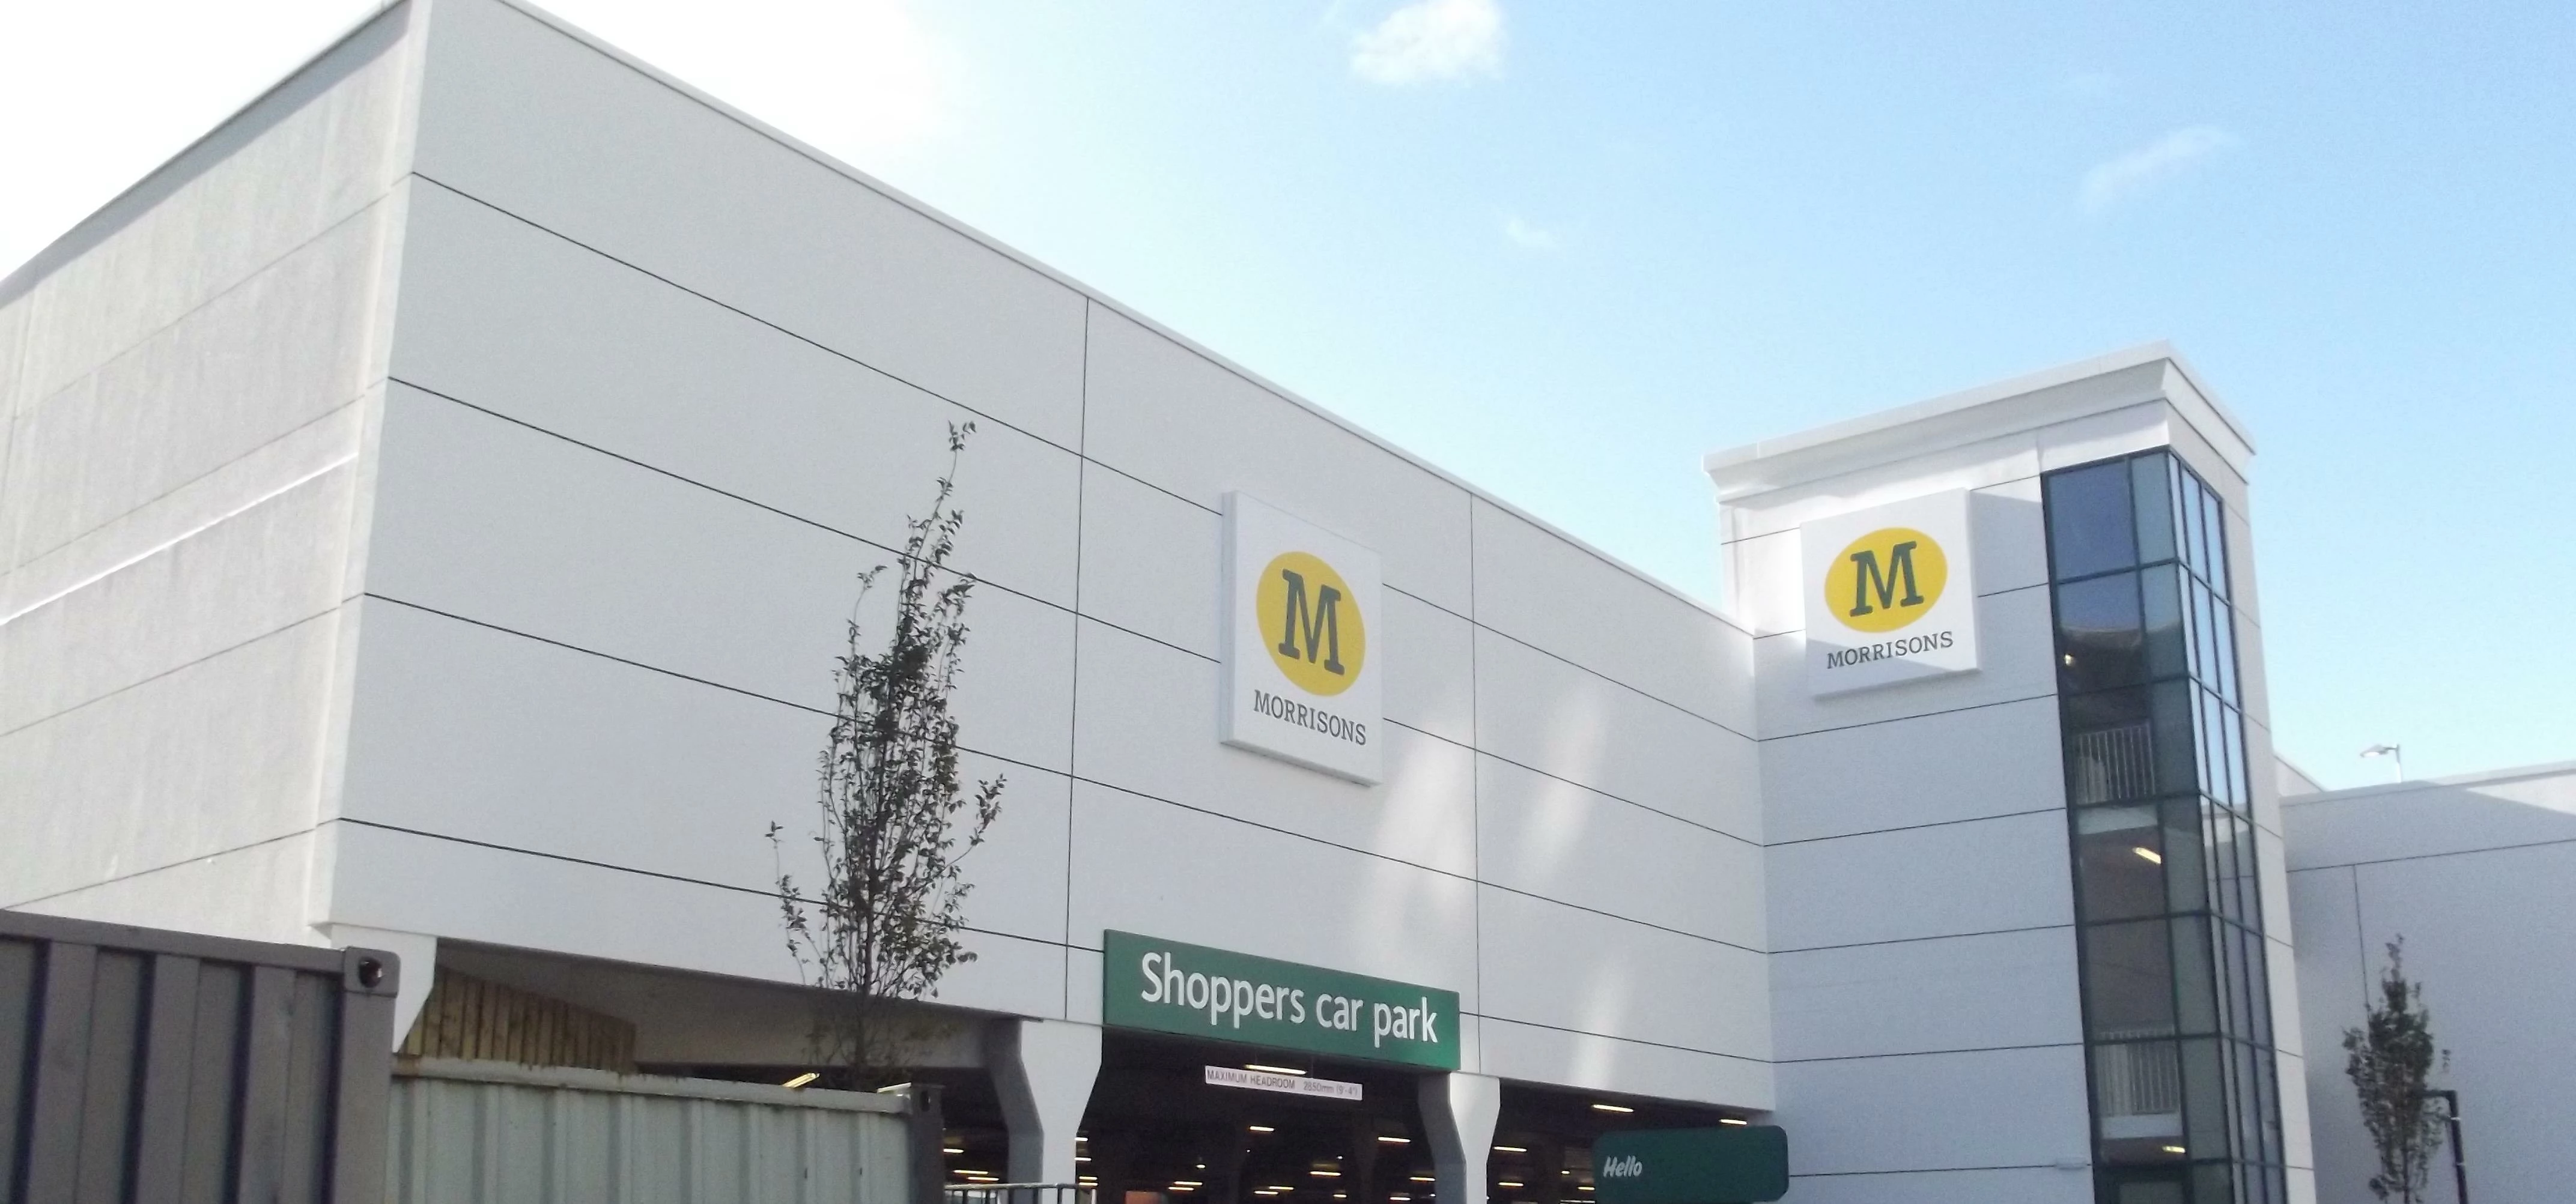 Morrisons Five Ways - from Hagley Road - Shoppers car park